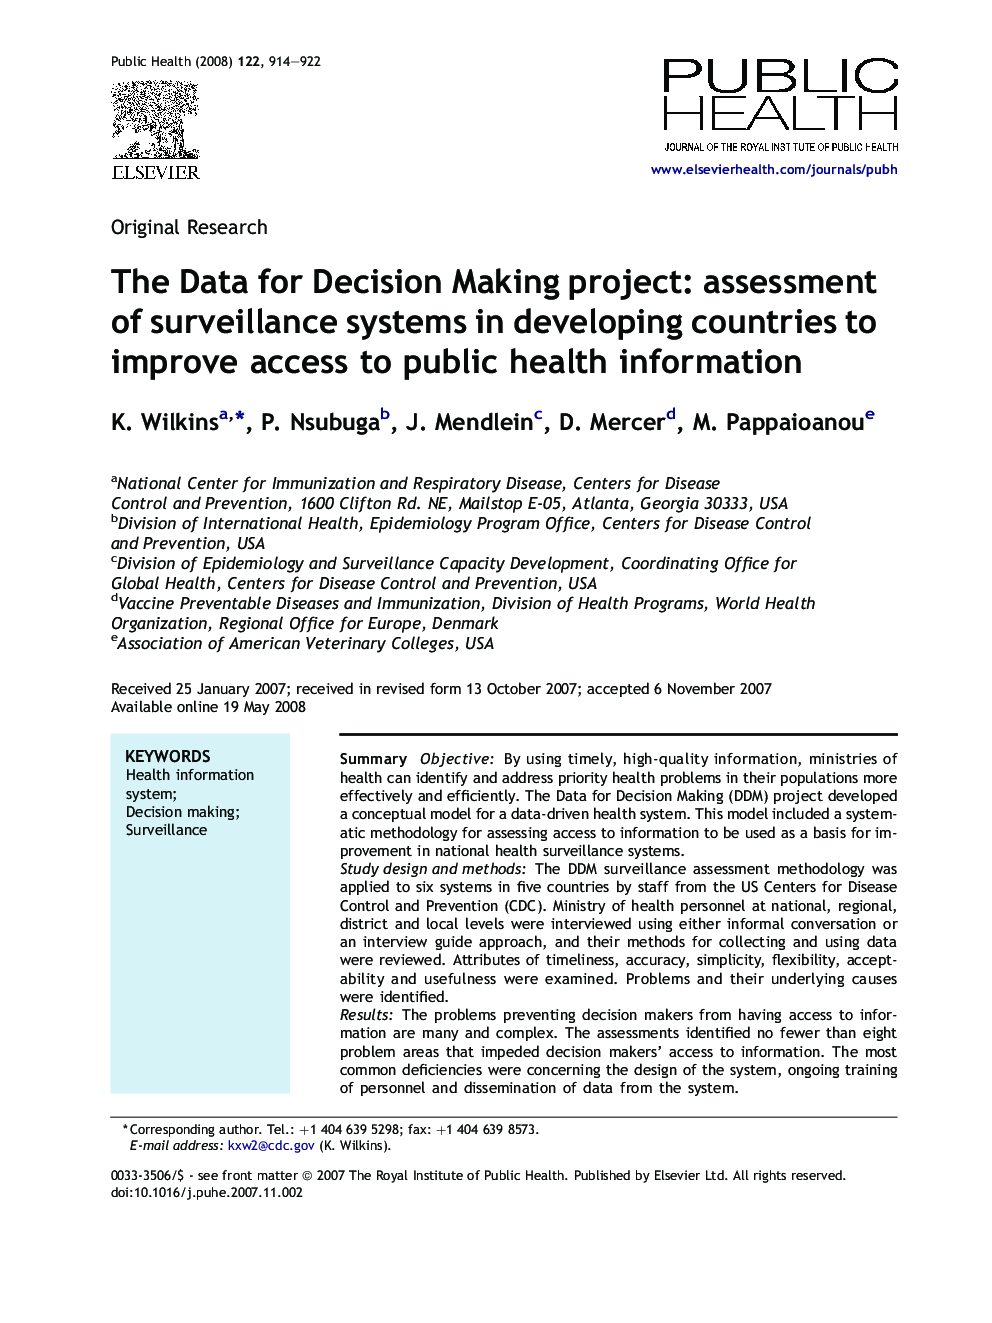 The Data for Decision Making project: assessment of surveillance systems in developing countries to improve access to public health information